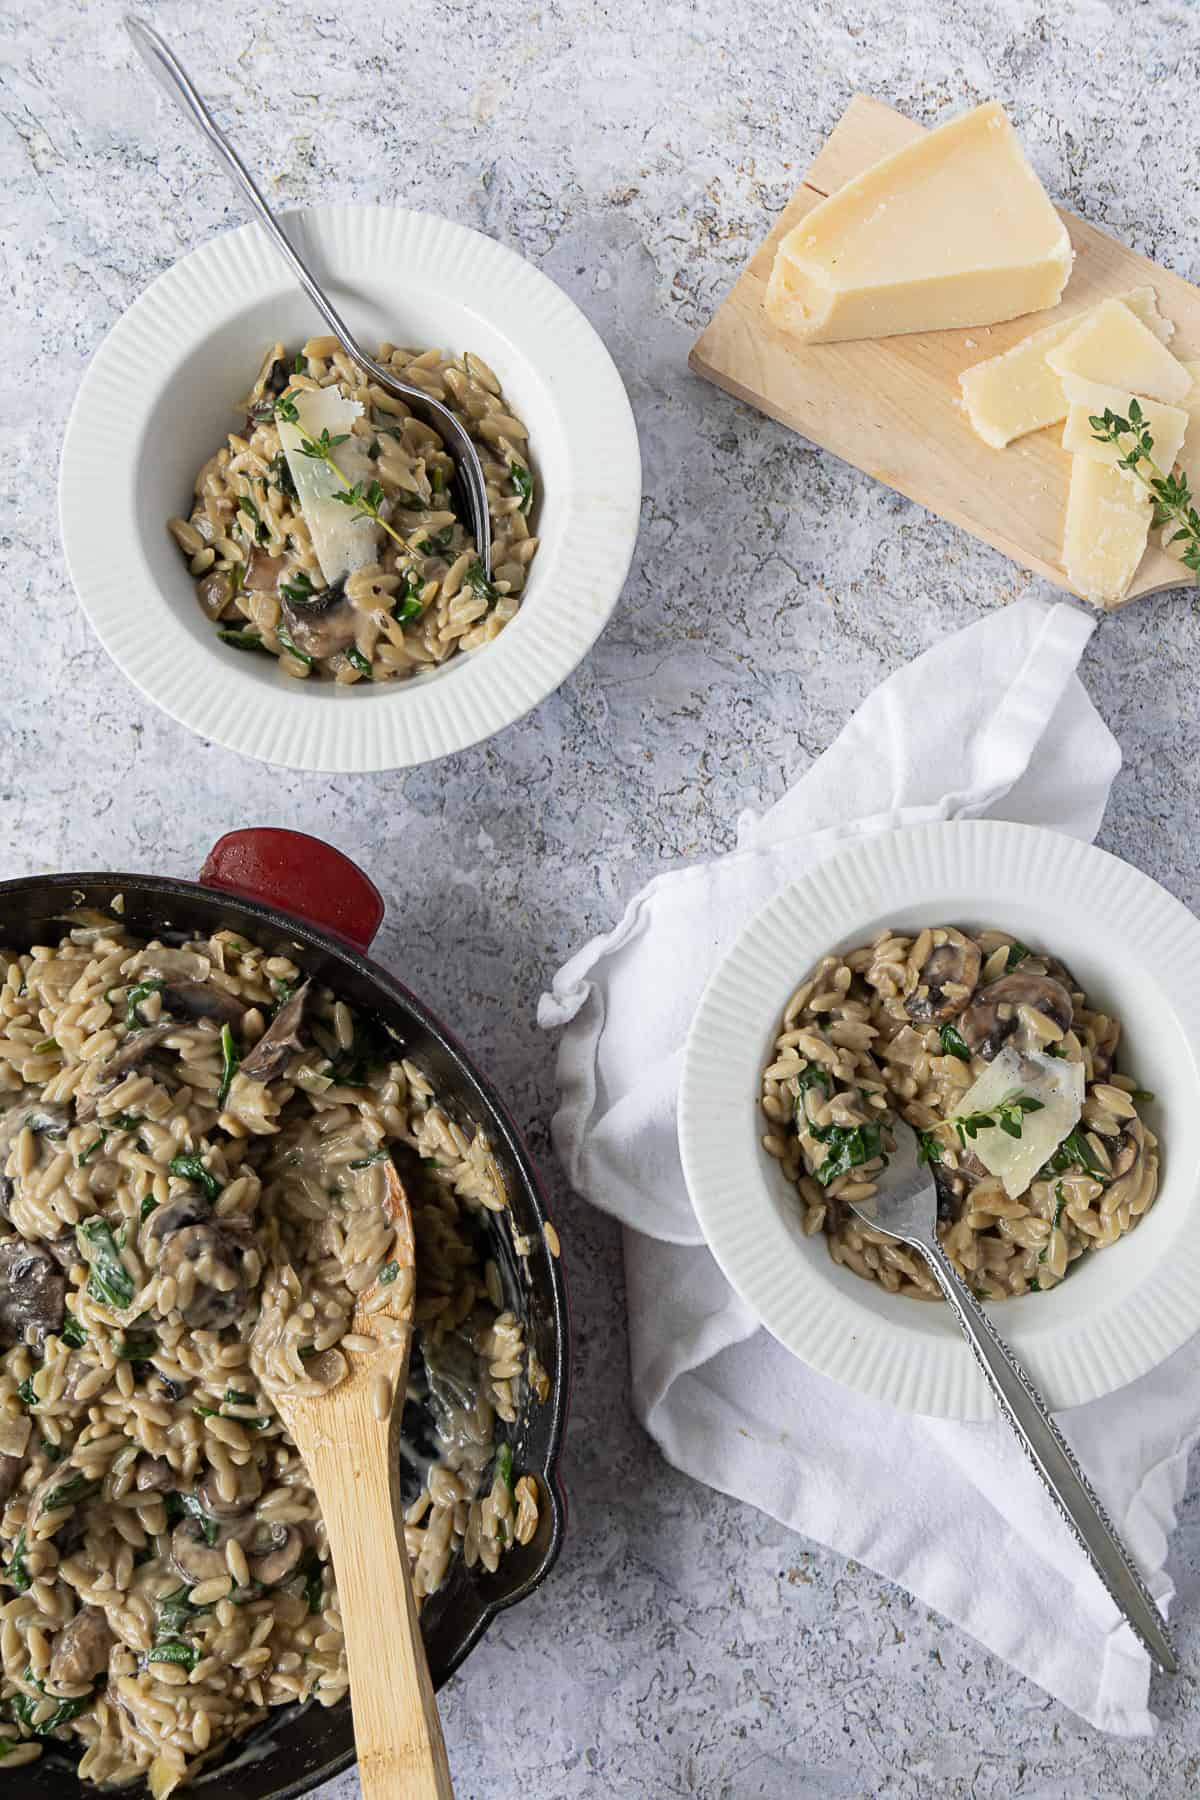 Top view of 2 bowls with mushroom orzo and a skillet on the side and a wood board with parmesan cheese on the other side. 